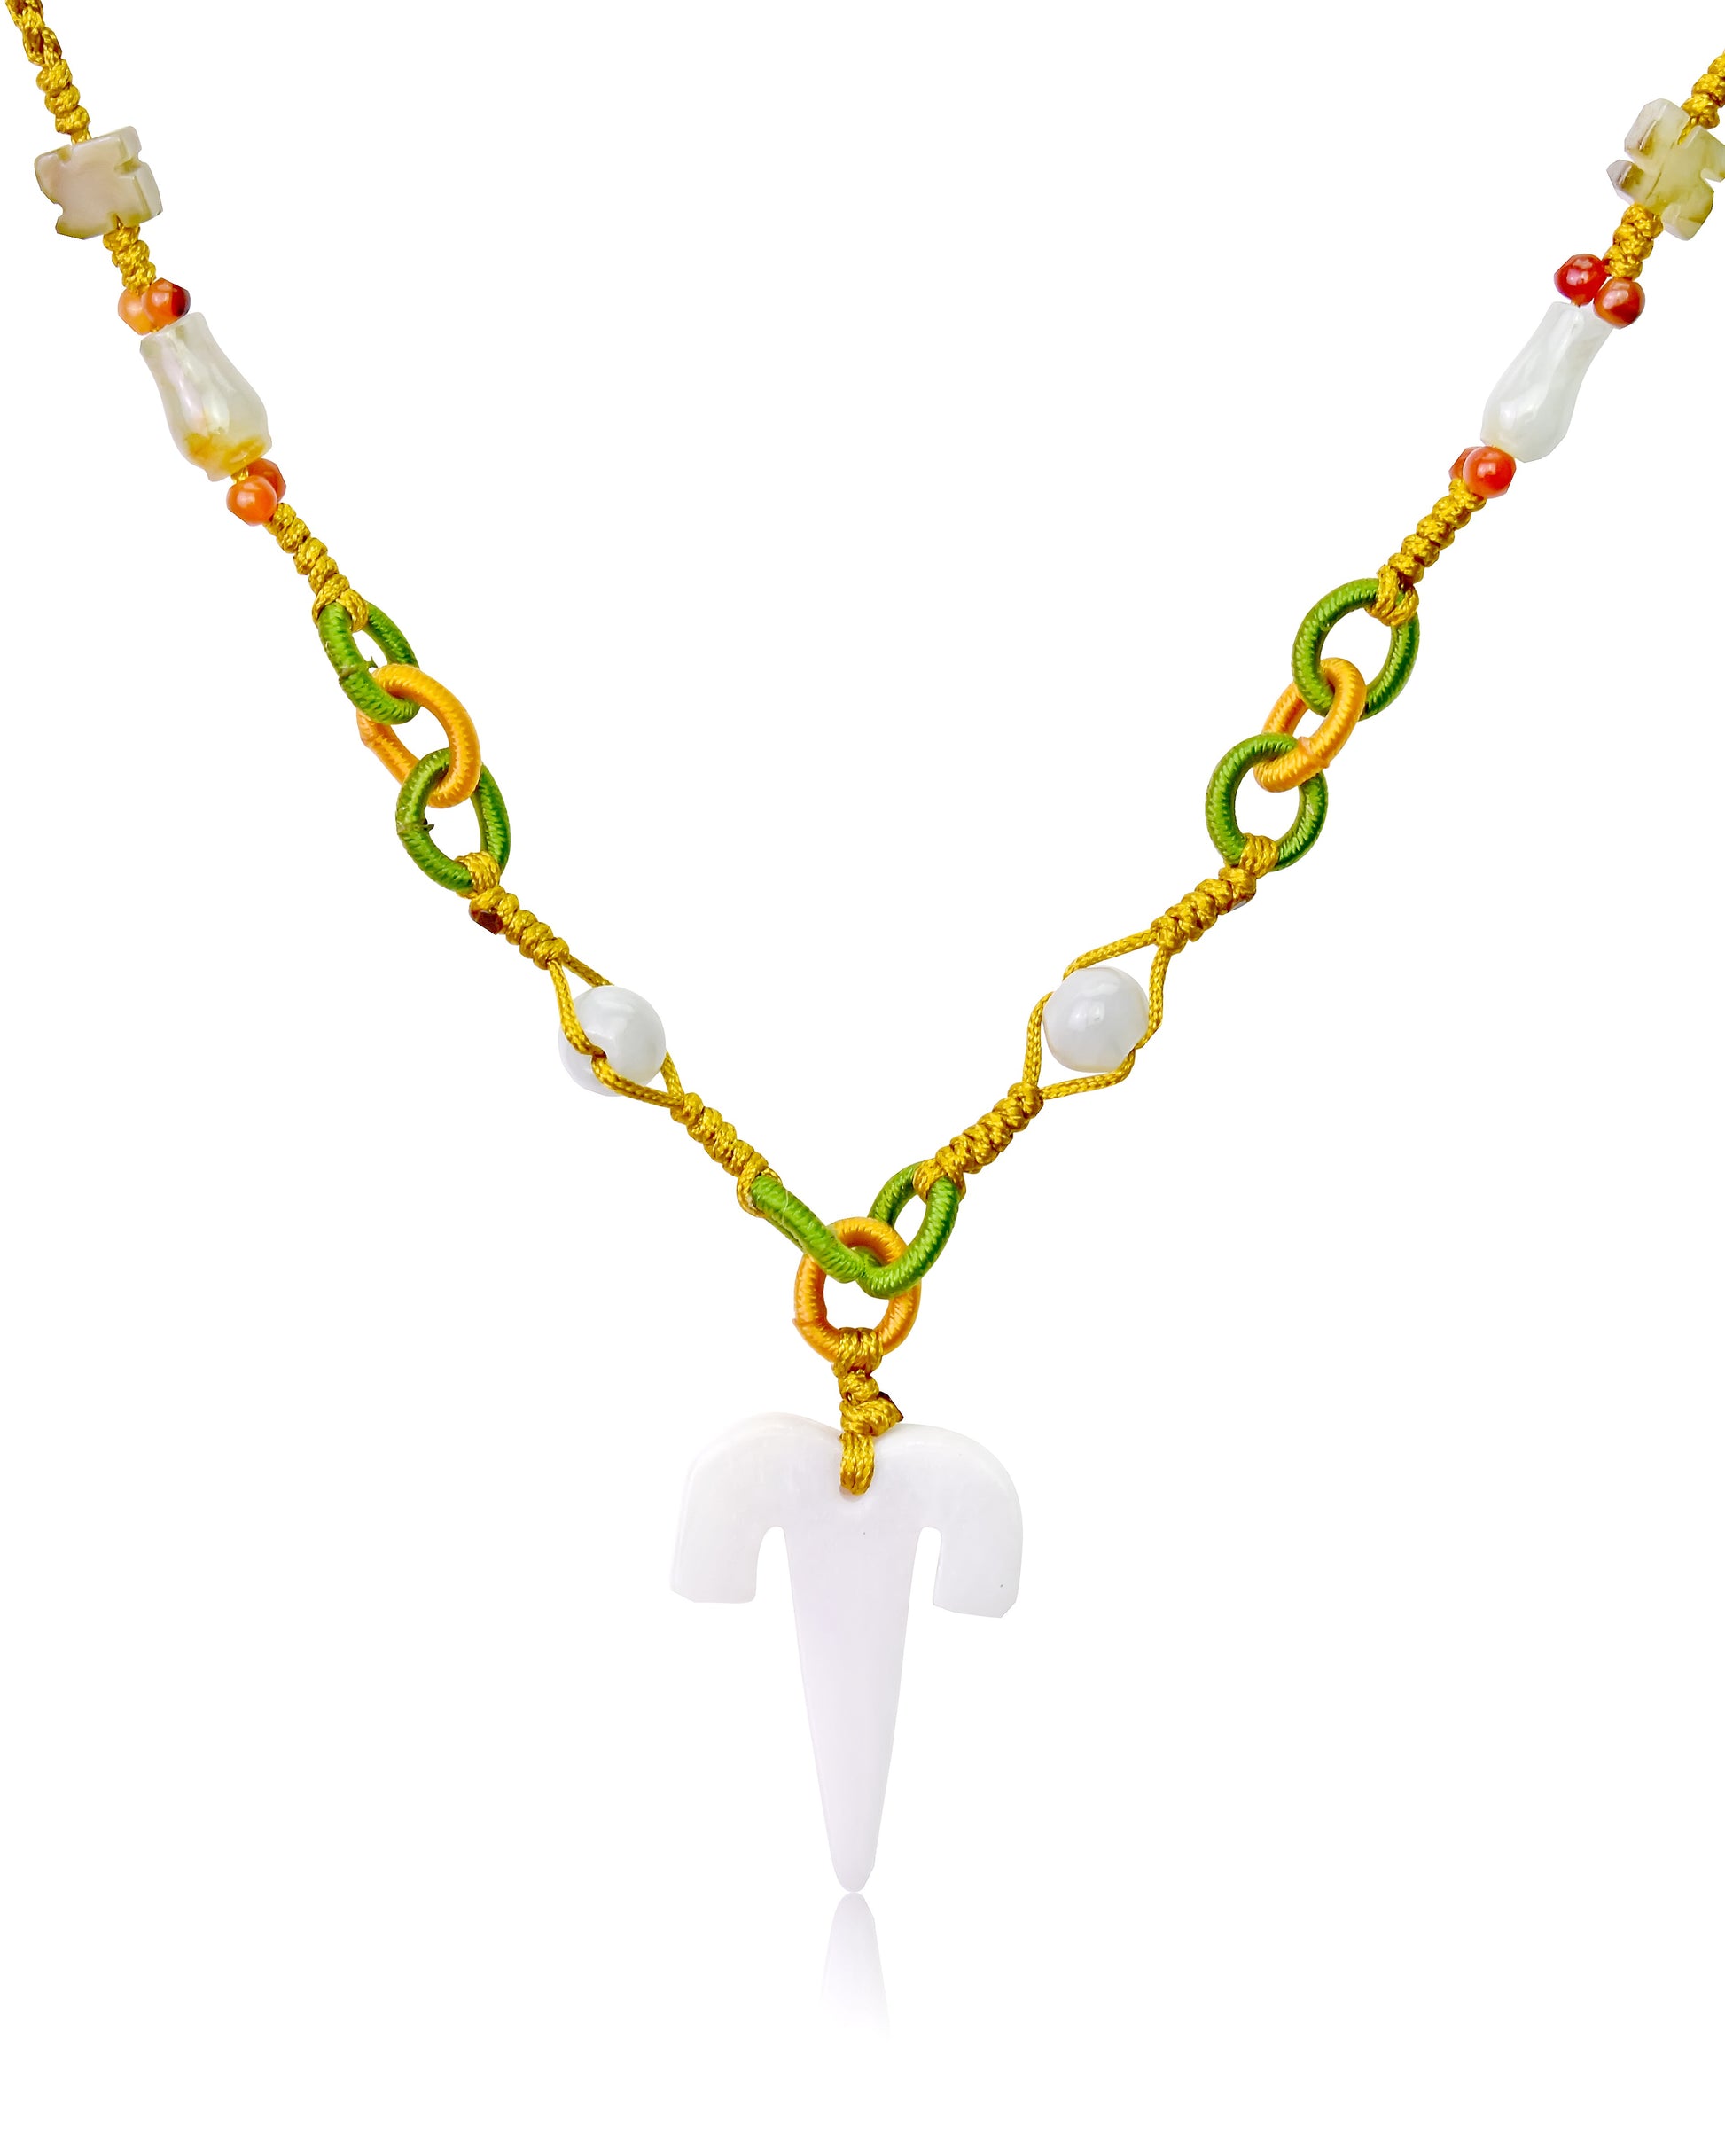 Aries Astrology Handmade Jade Necklace Single Pendant with Yellow Cord